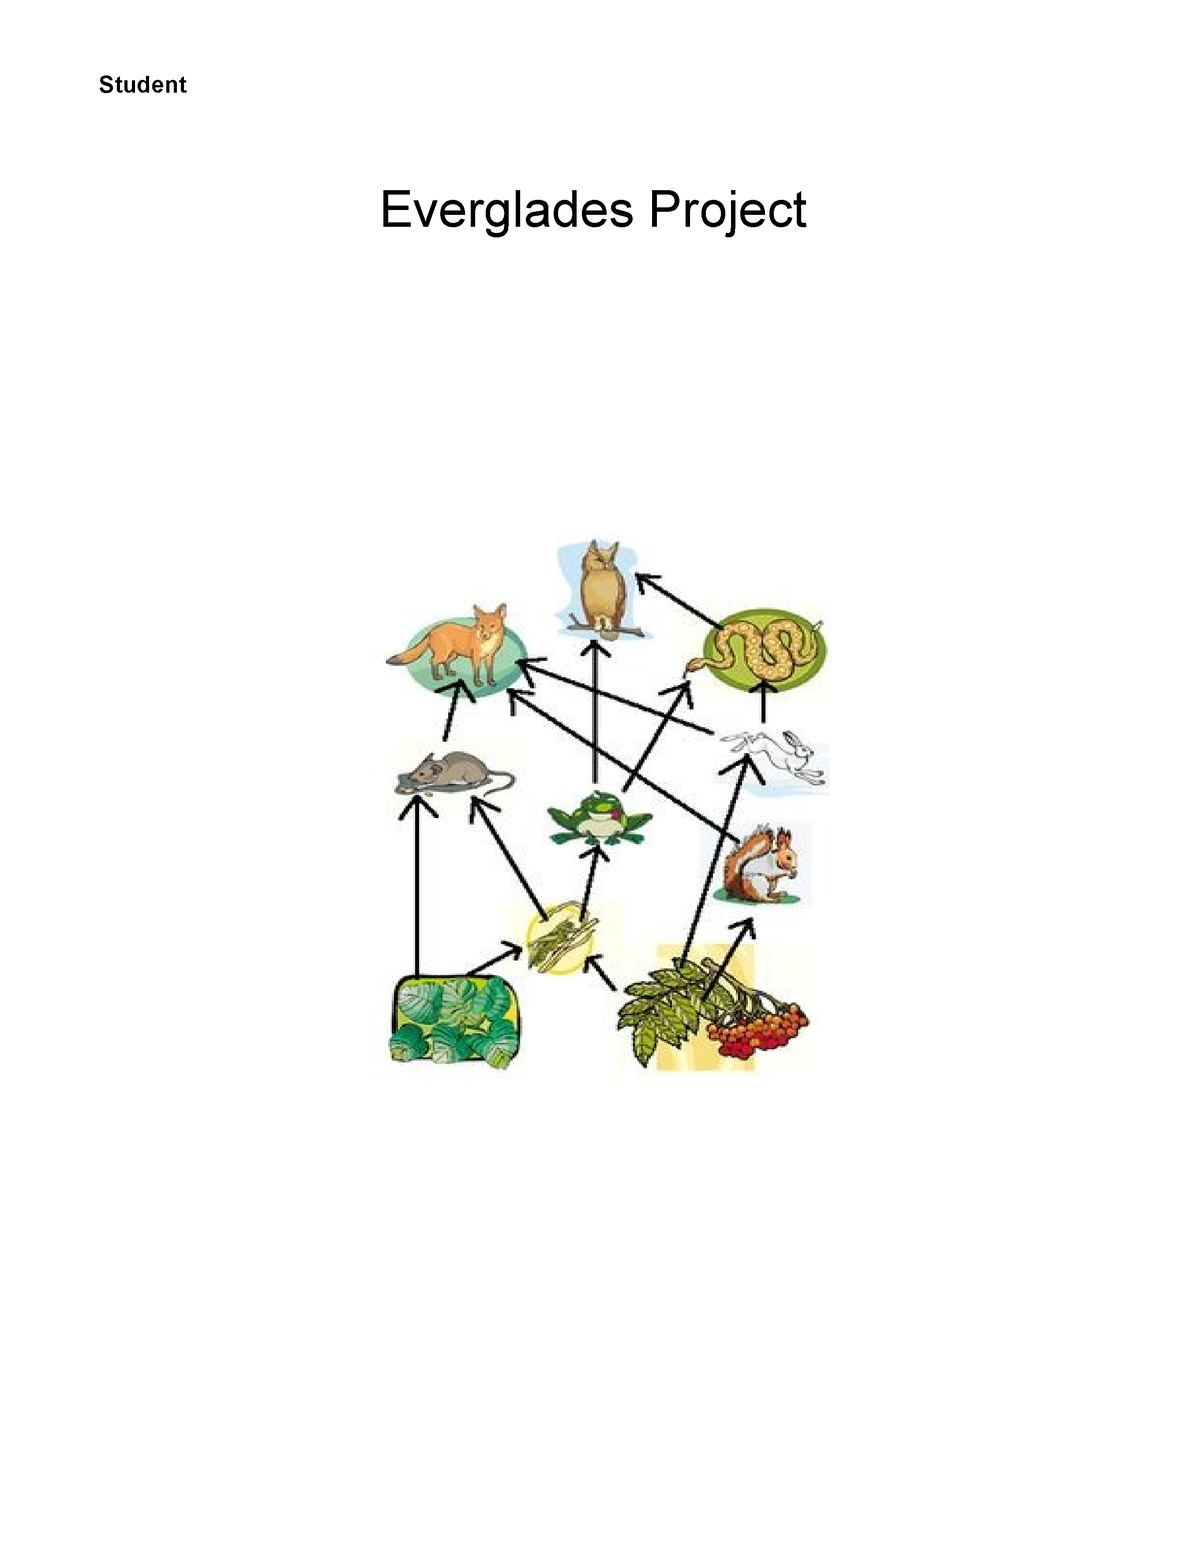 everglades-project-honors-everglades-project-purpose-the-purpose-of